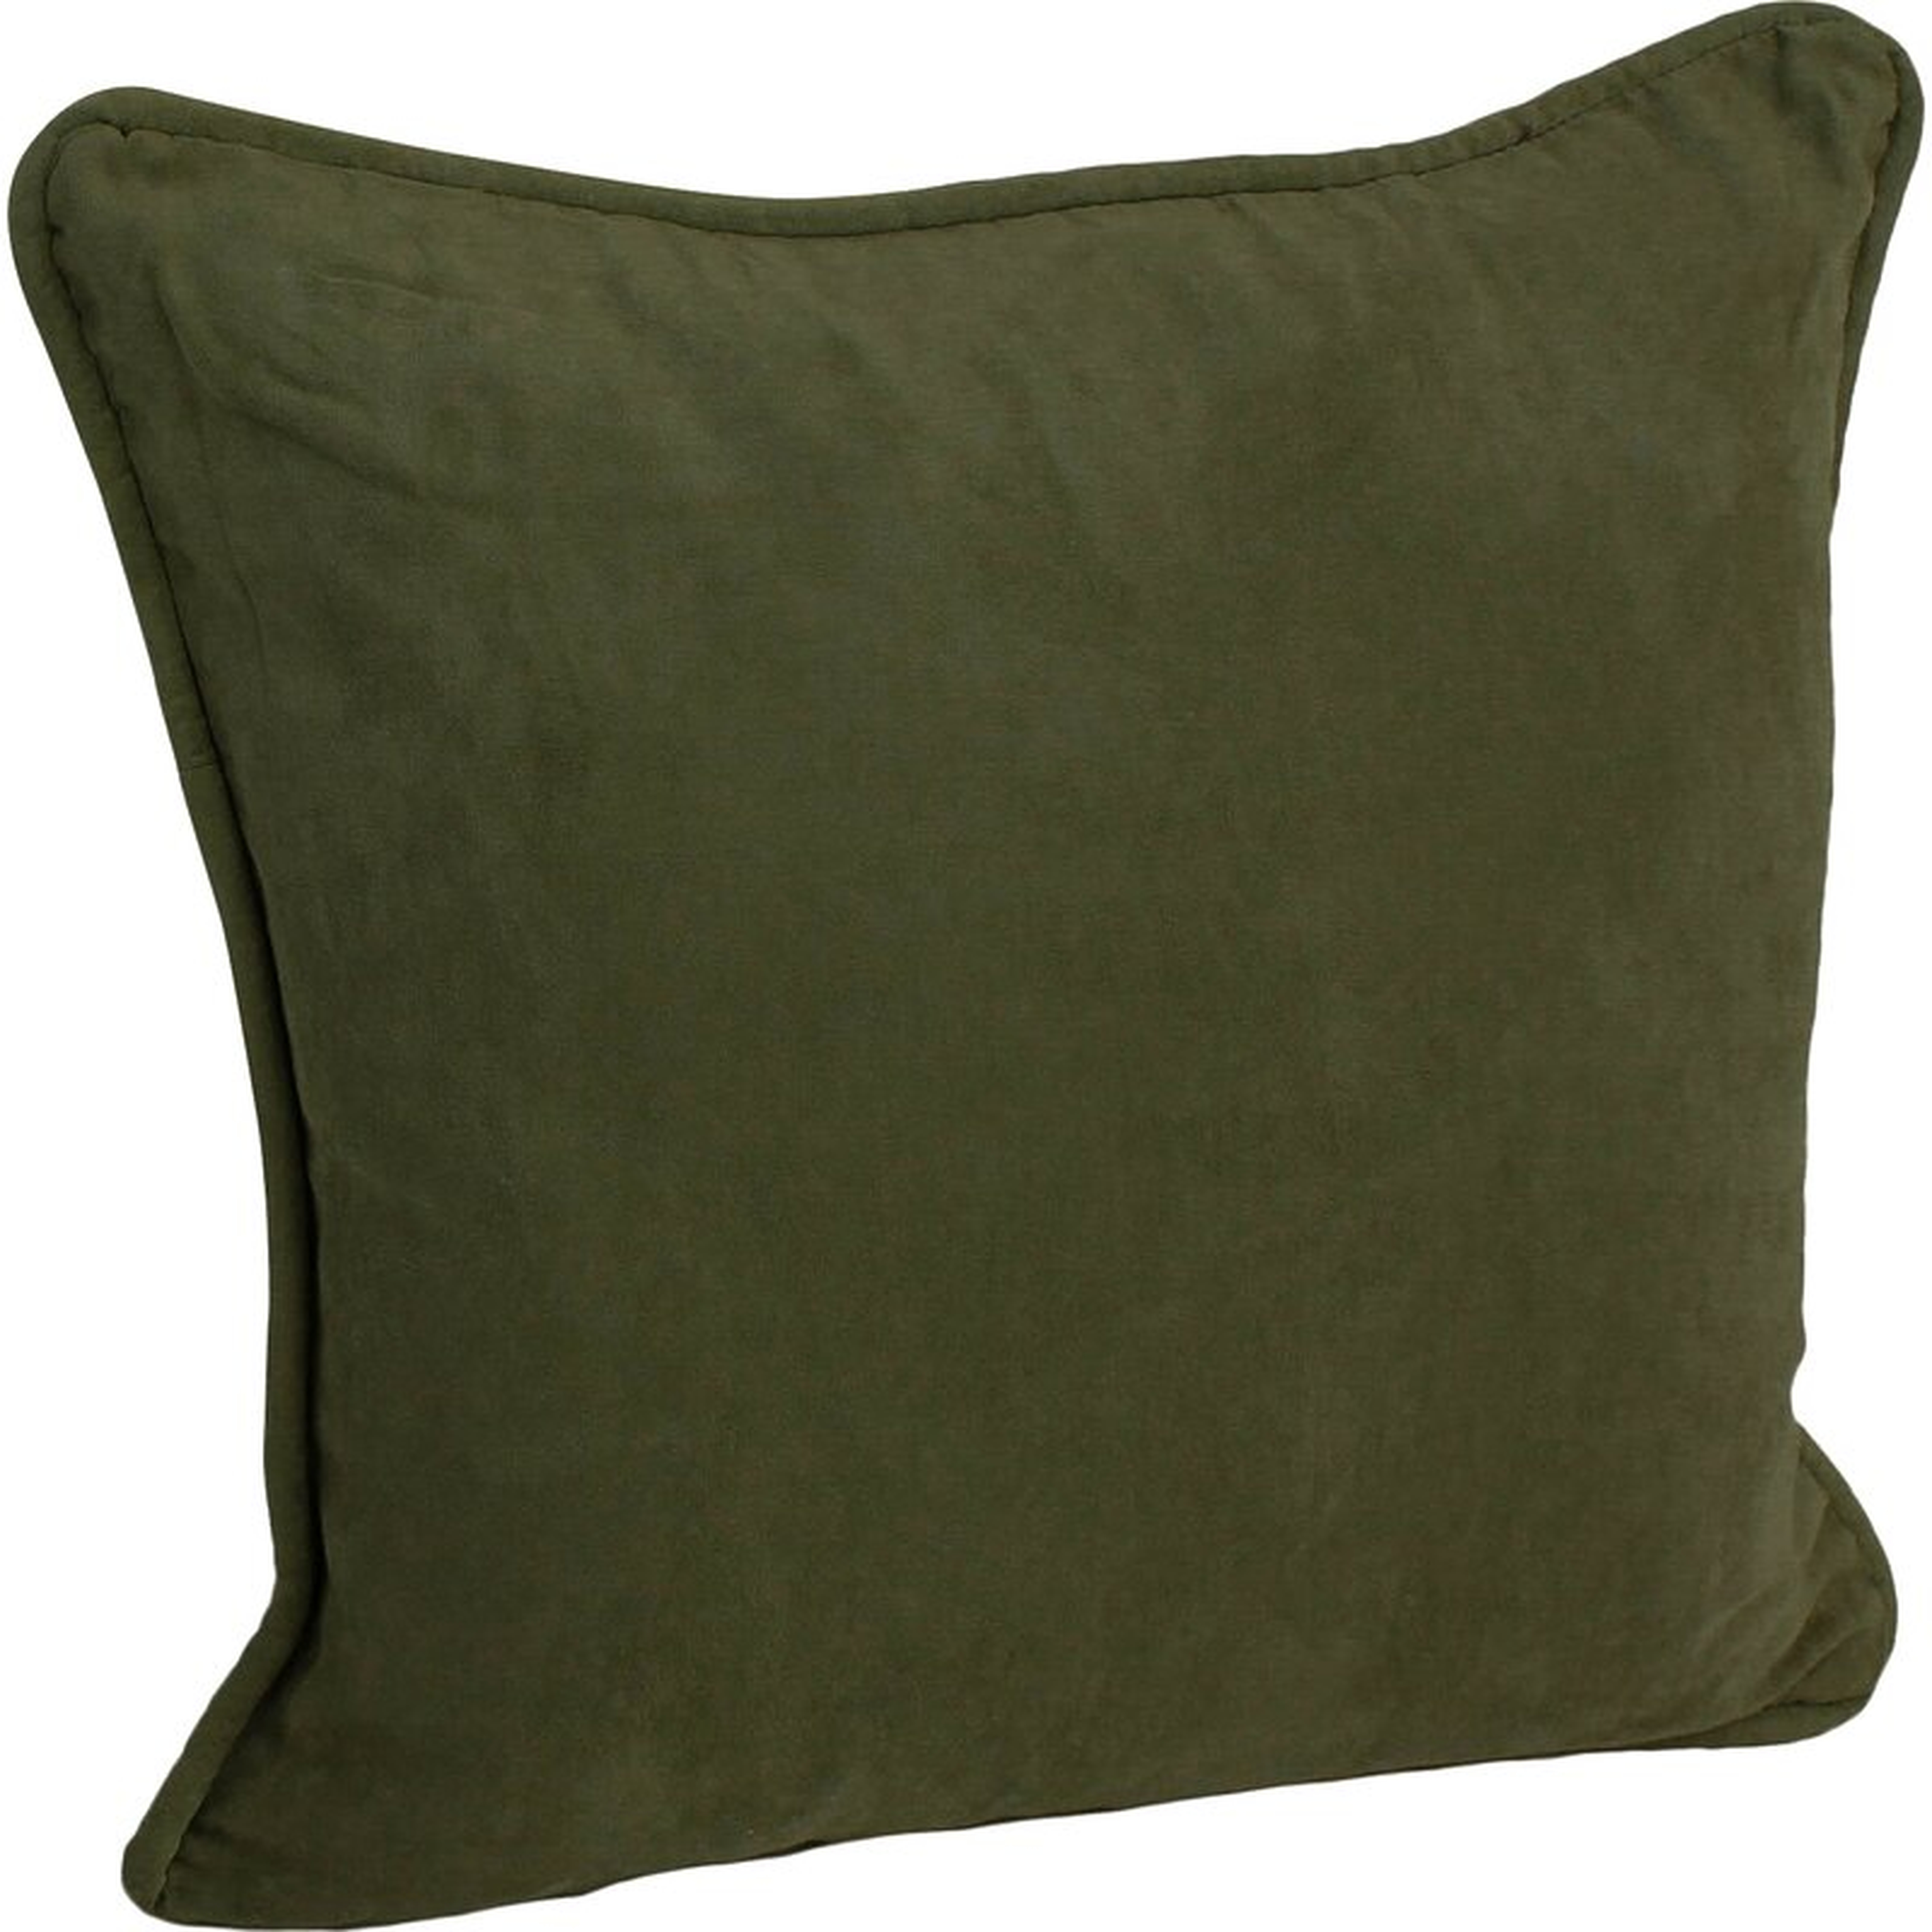 Hargreaves Corded Throw Pillow (Set of 2) - Wayfair